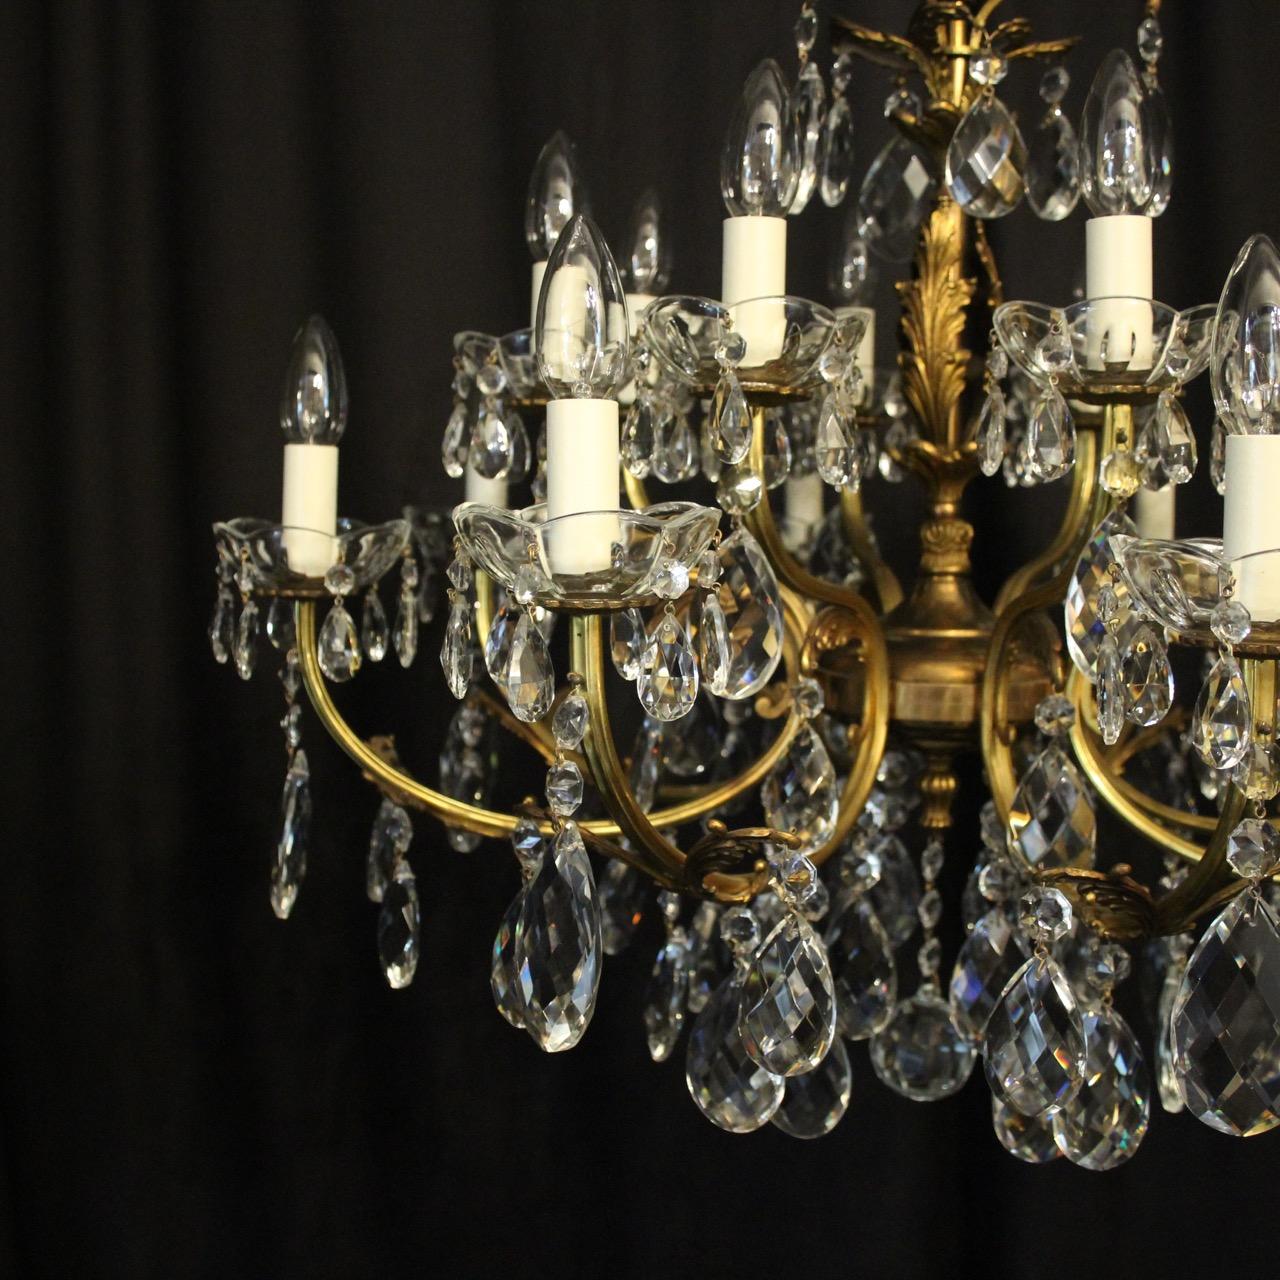 An Italian gilded brass and crystal 16-light double tiered antique chandelier, the leaf scrolling arms with Acanthus leaf outcrops and crystal bobeche drip pans, issuing from a triple leaf pierced central column with a foliated leaf canopy,